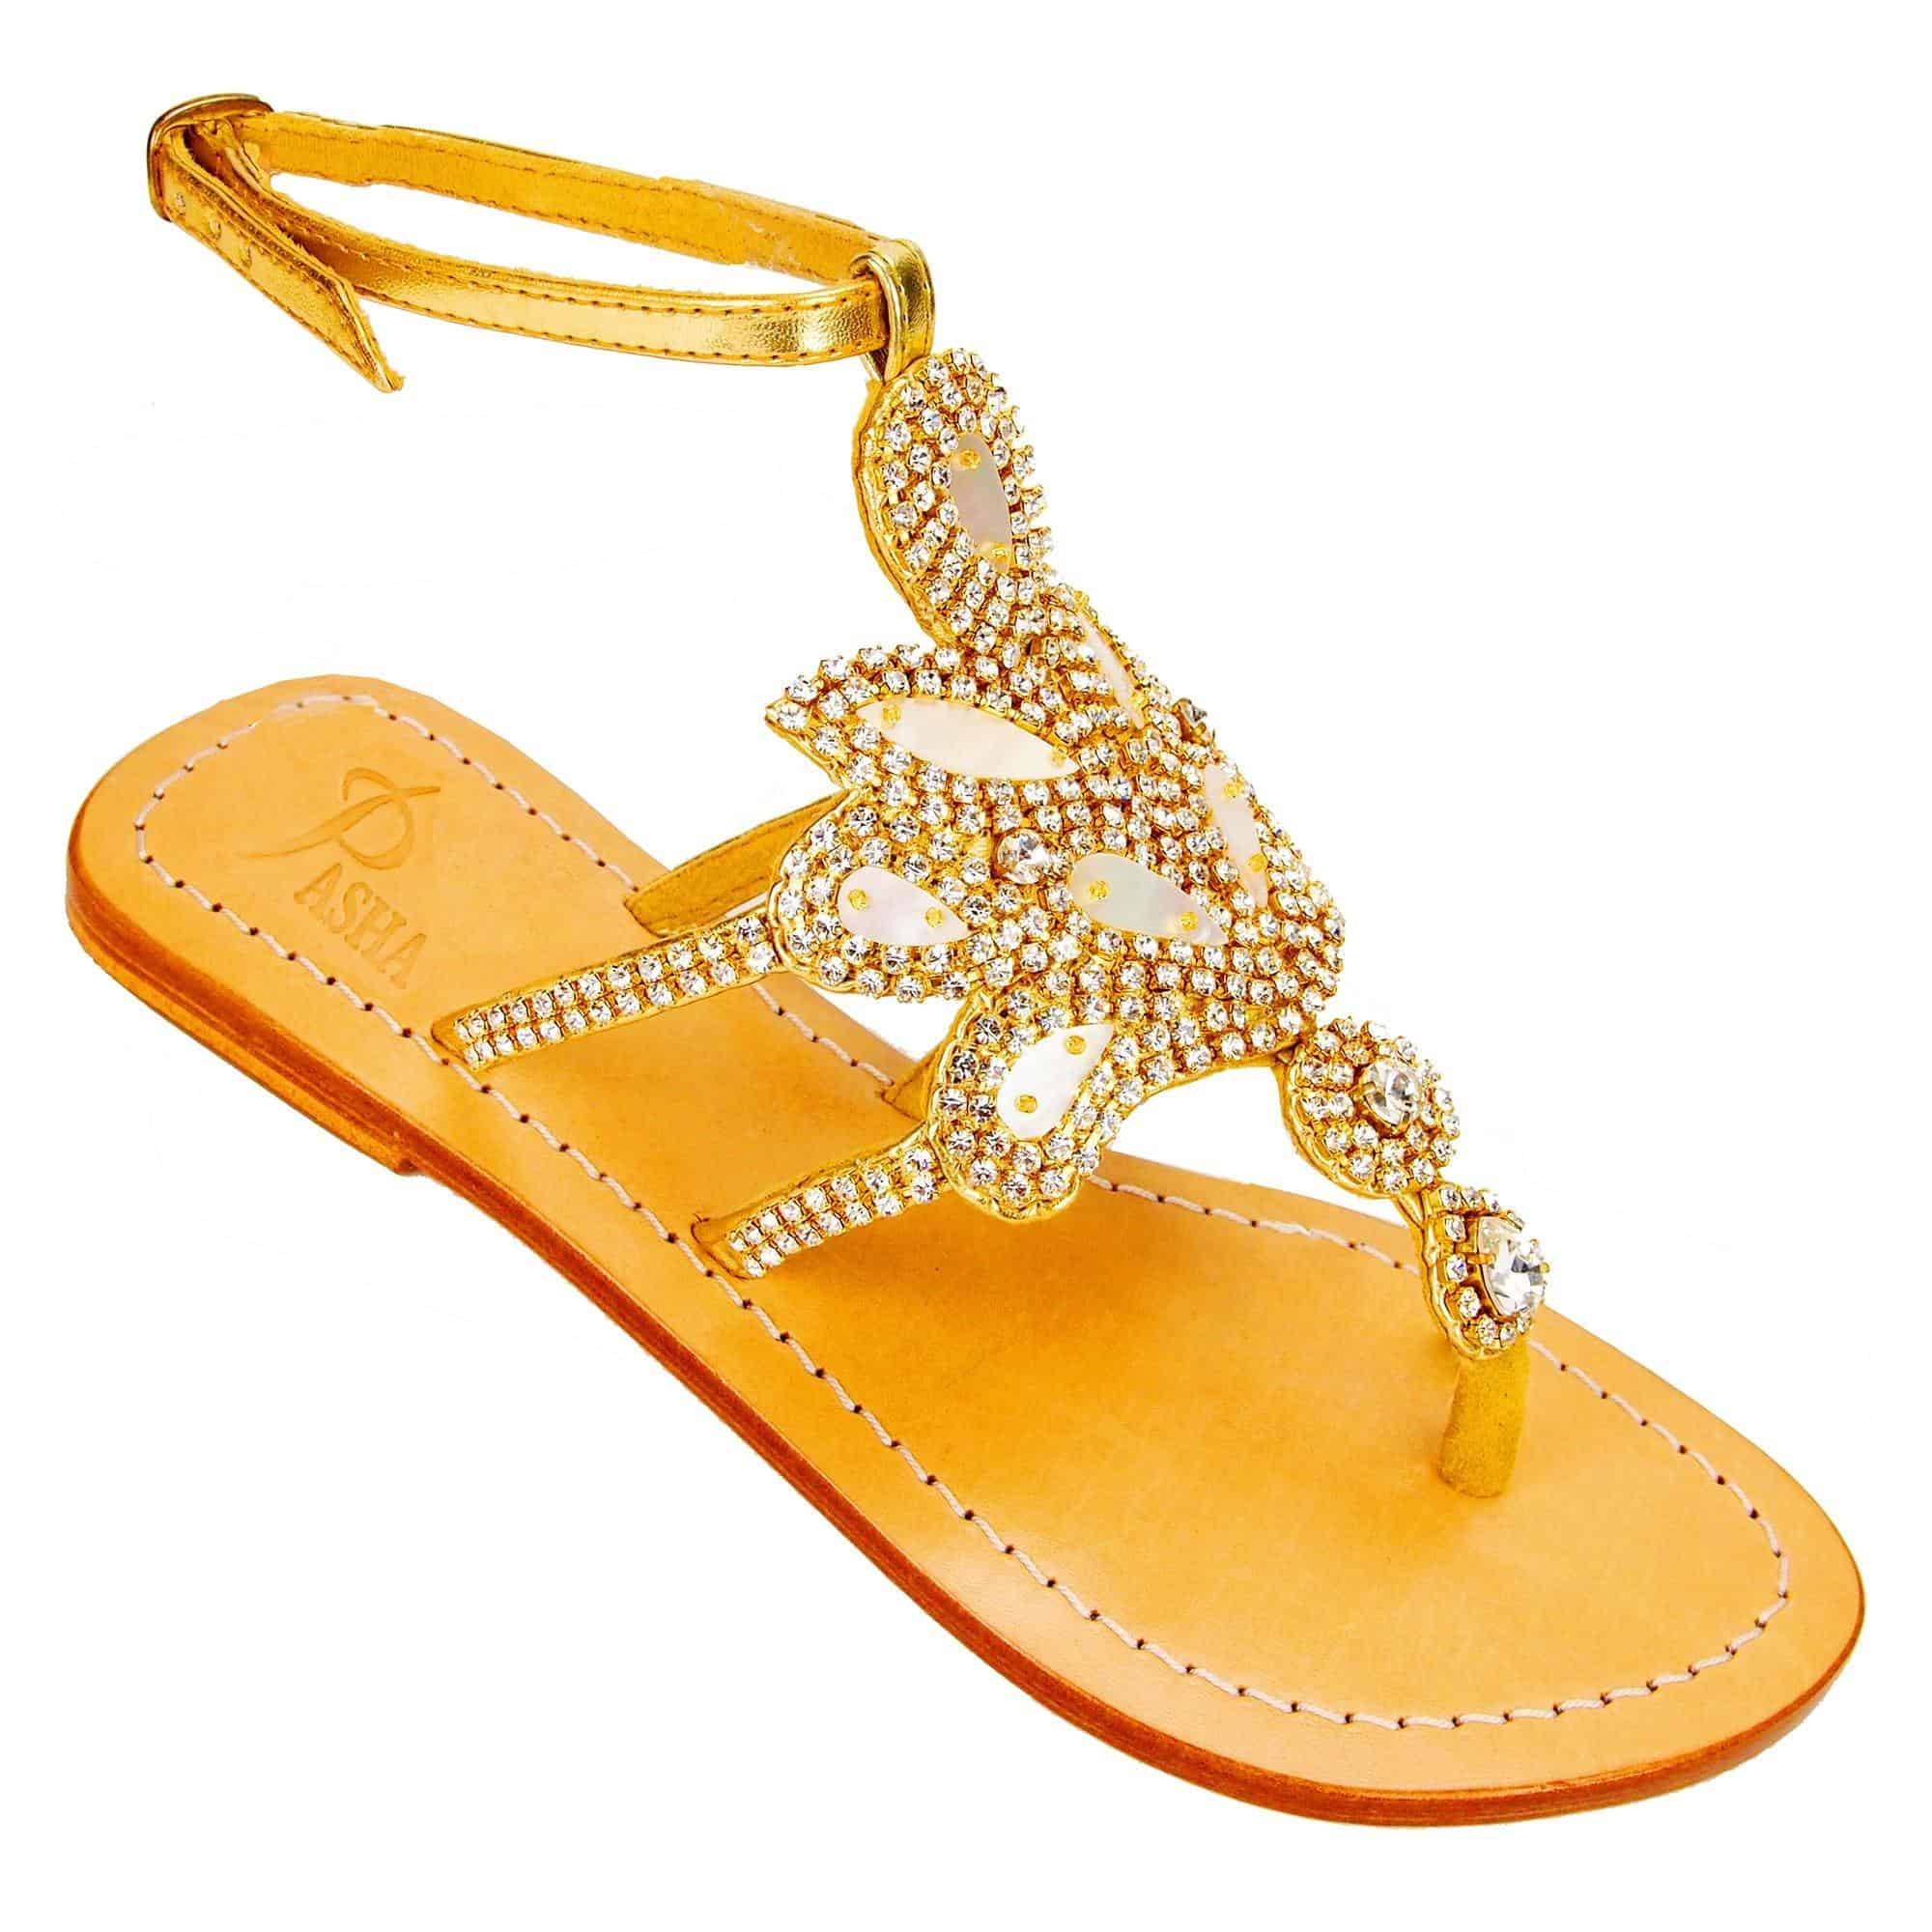 HANALEI - Pasha Sandals - Jewelry for your feet - 